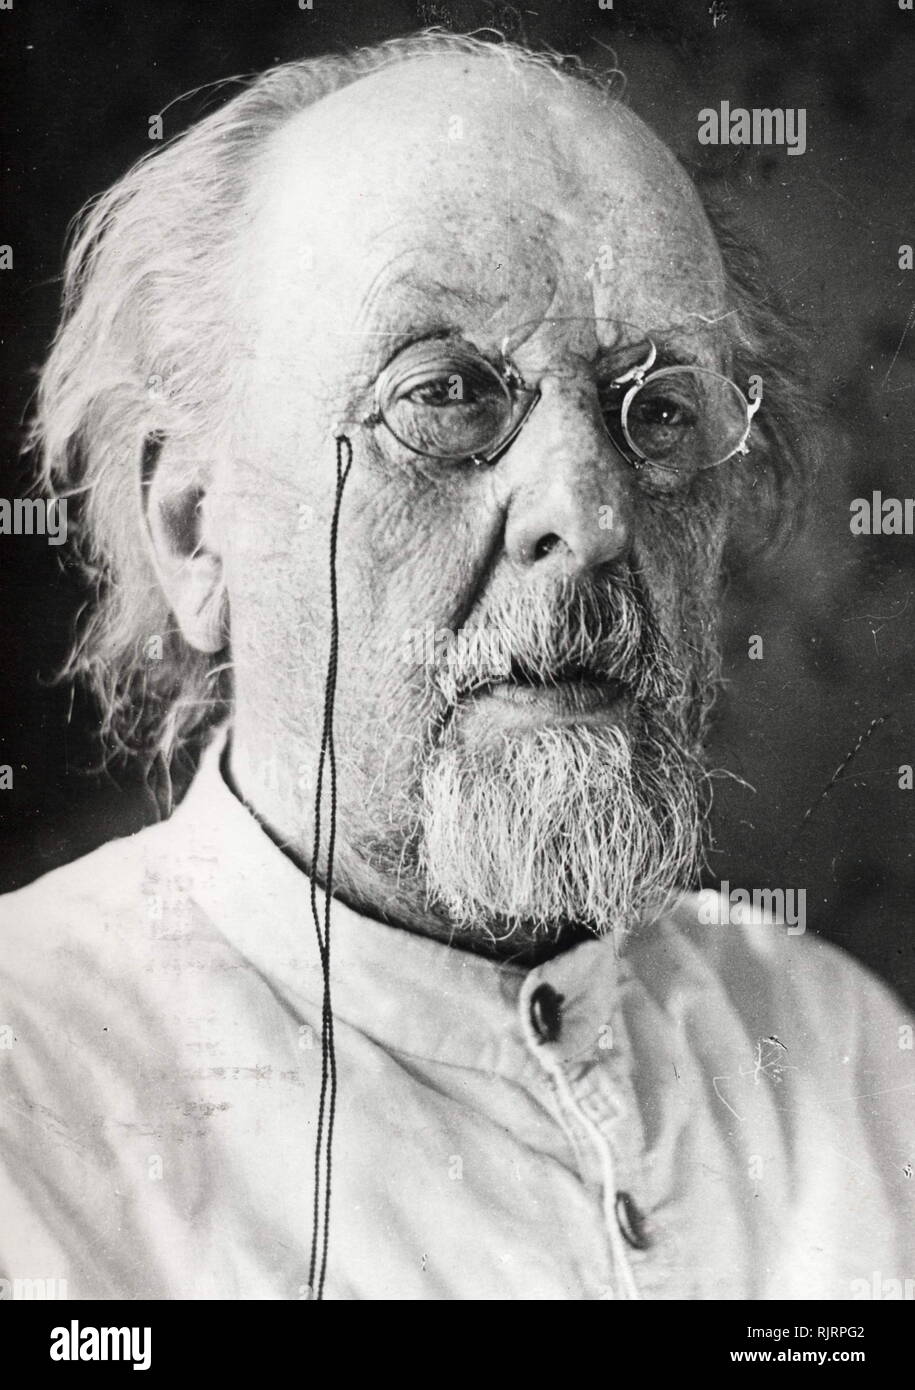 Konstantin Eduardovich Tsiolkovsky (1857 - 1935); Russian rocket scientist and pioneer of the astronautic theory. he is considered to be one of the founding fathers of modern rocketry and astronautics. Stock Photo